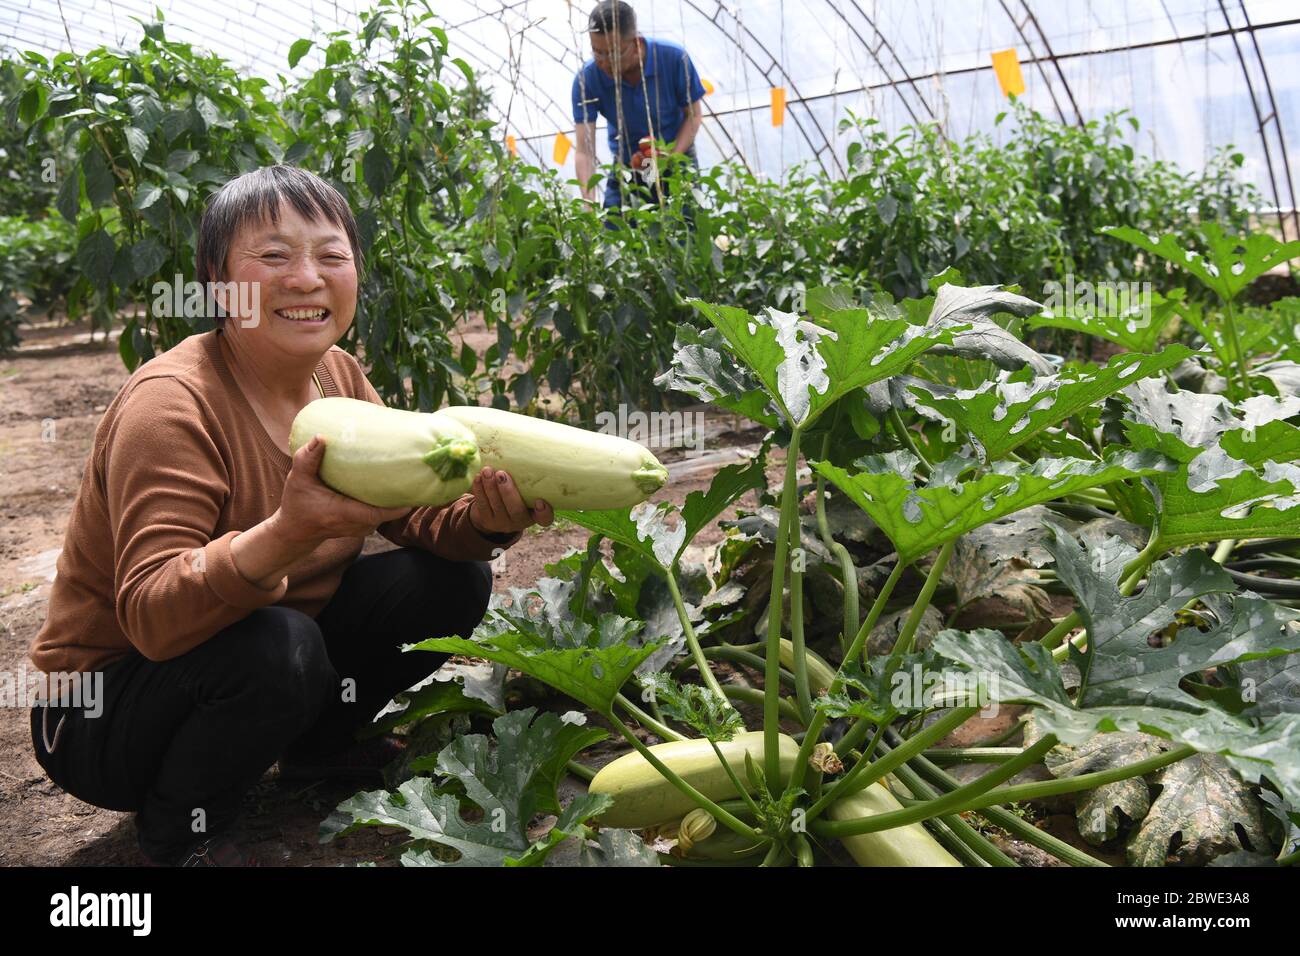 (200601) -- SHENMU, June 1, 2020 (Xinhua) -- A villager picks summer squash at Gechougou Village, Shenmu County of northwest China's Shaanxi Province, May 29, 2020. In 2003, Zhang Yinglong resigned his work and returned to his hometown Shenmu County, which located in an isolated desert. He contracted a land of 192,000 Mu (about 12,800 hectares) and made up his mind to plant trees and control sands here. Over the 17 years, Zhang has contracted accumulated 428,000 Mu (about 28,533 hectares) of lands and developed ecological planting and livestock raising industries that can lead the local villag Stock Photo